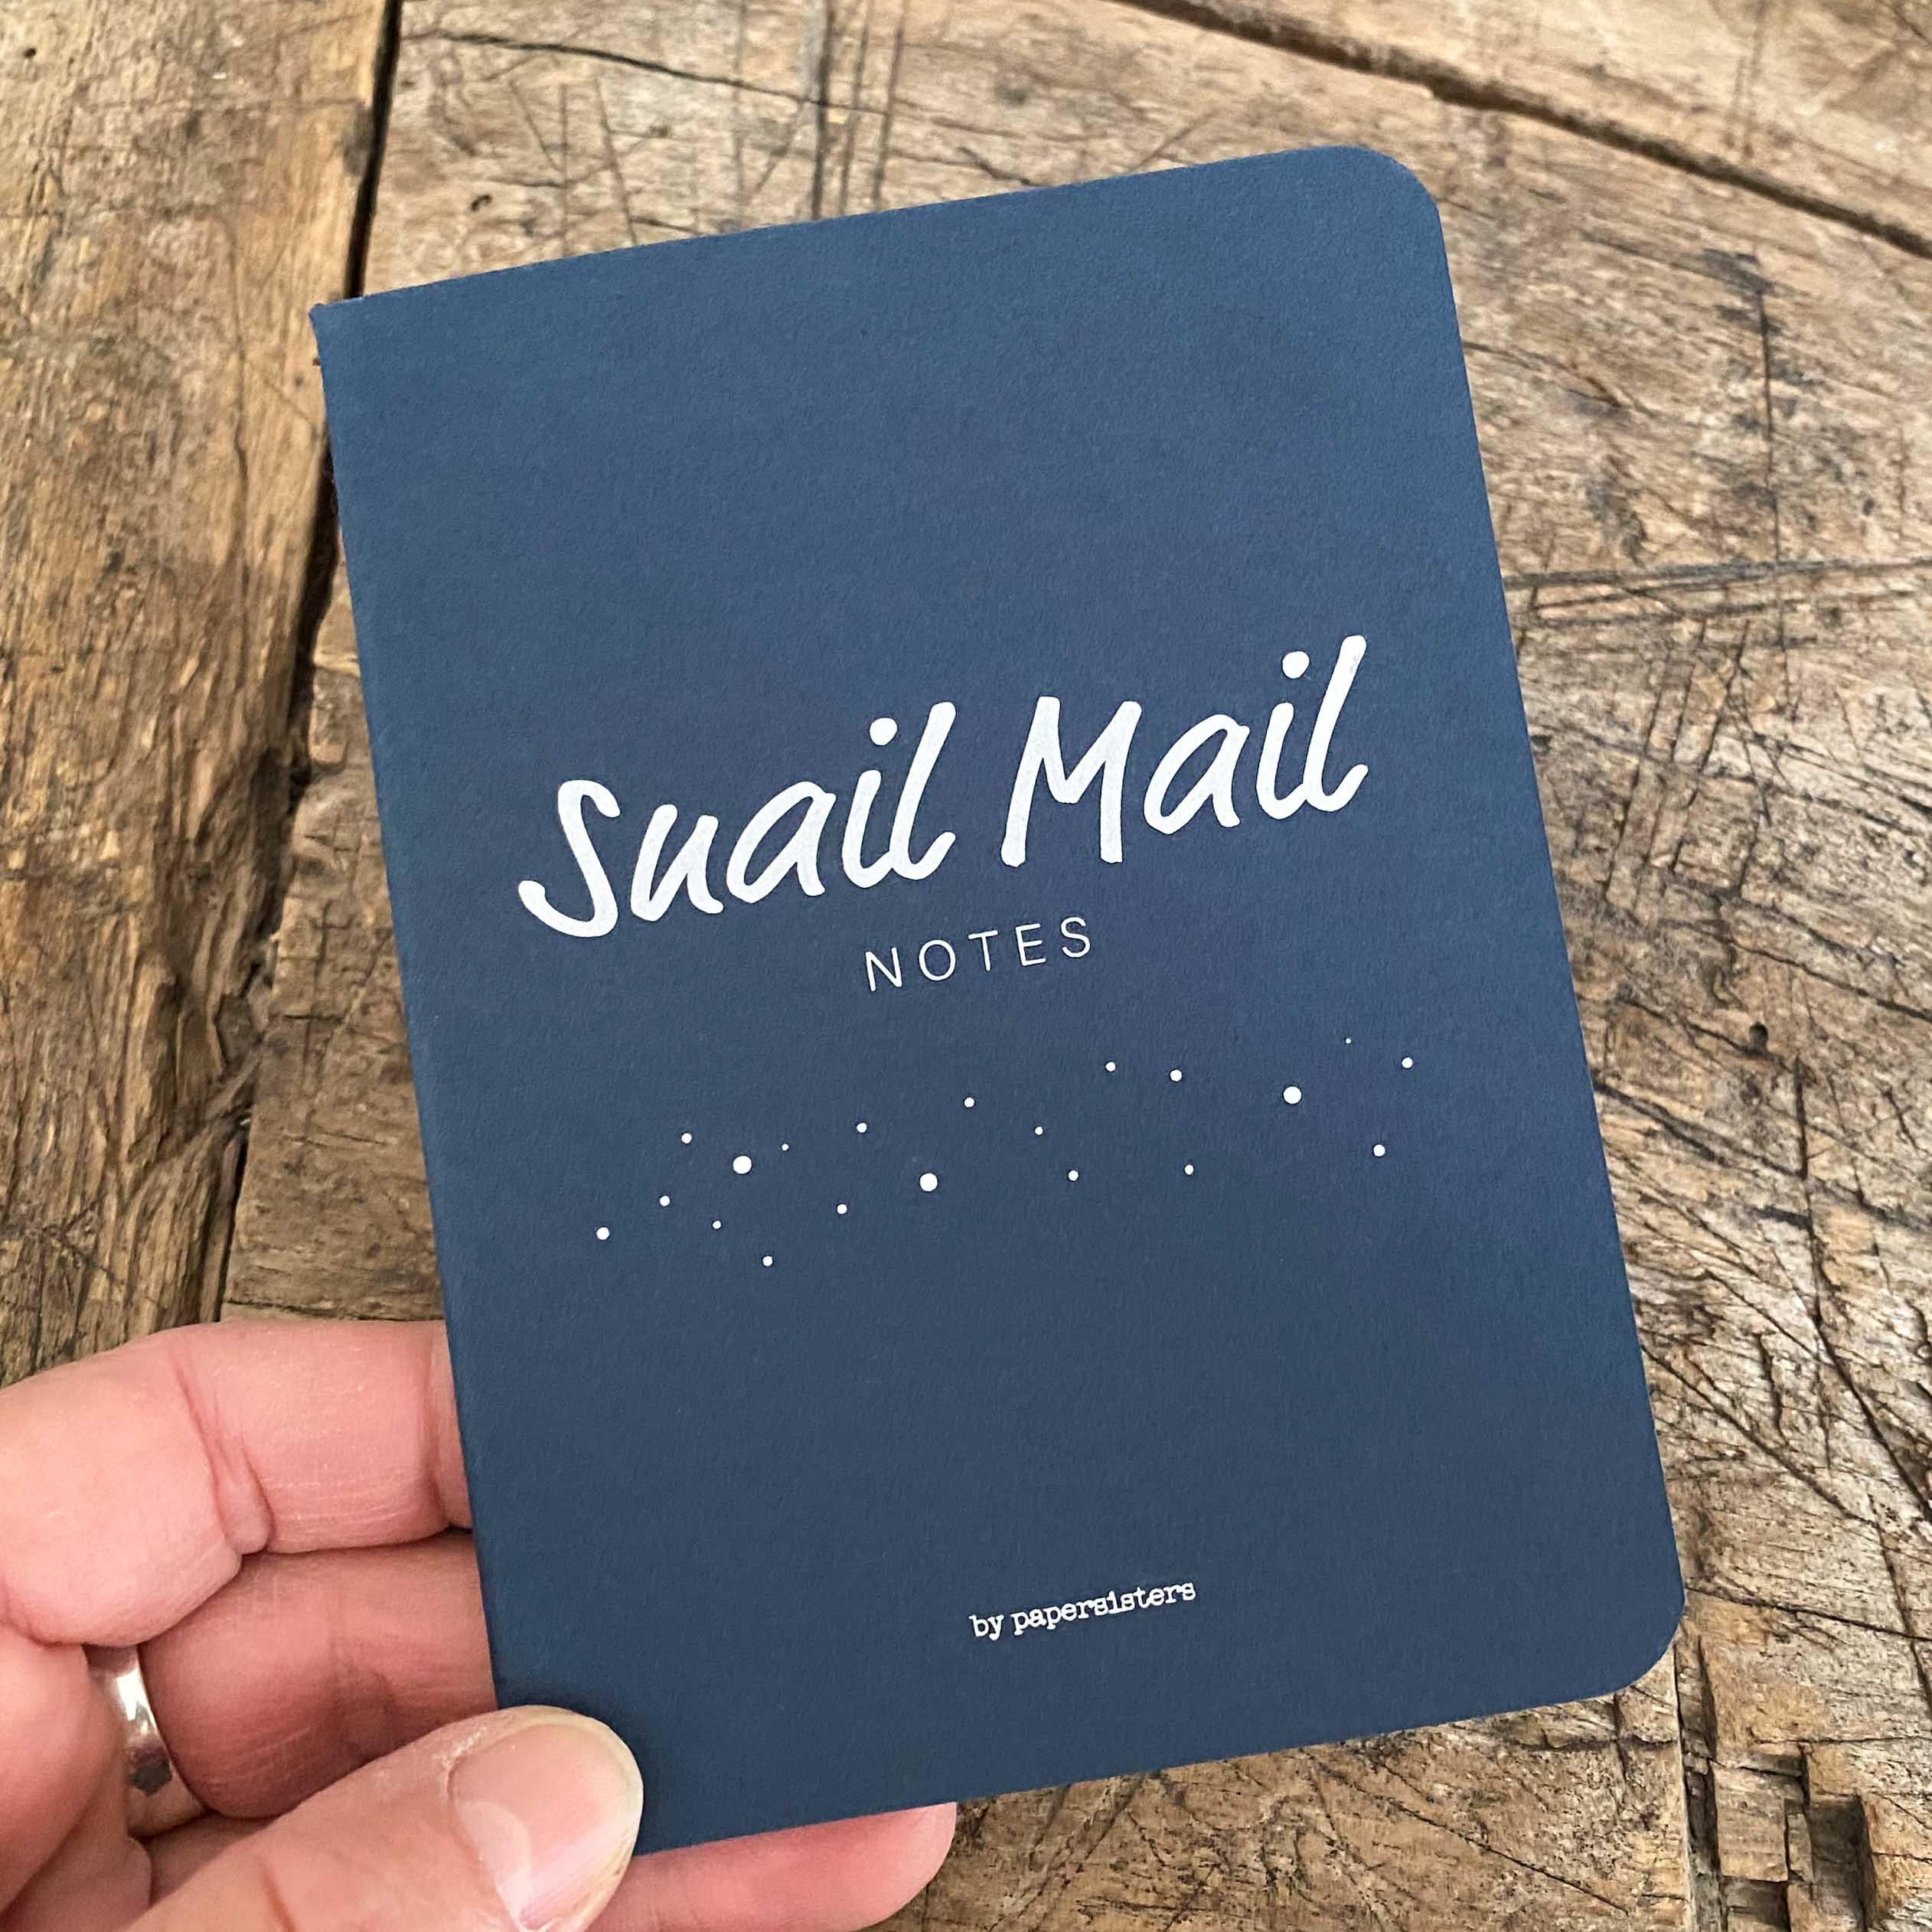 "Snail Mail Notes" Notizheft by papersisters